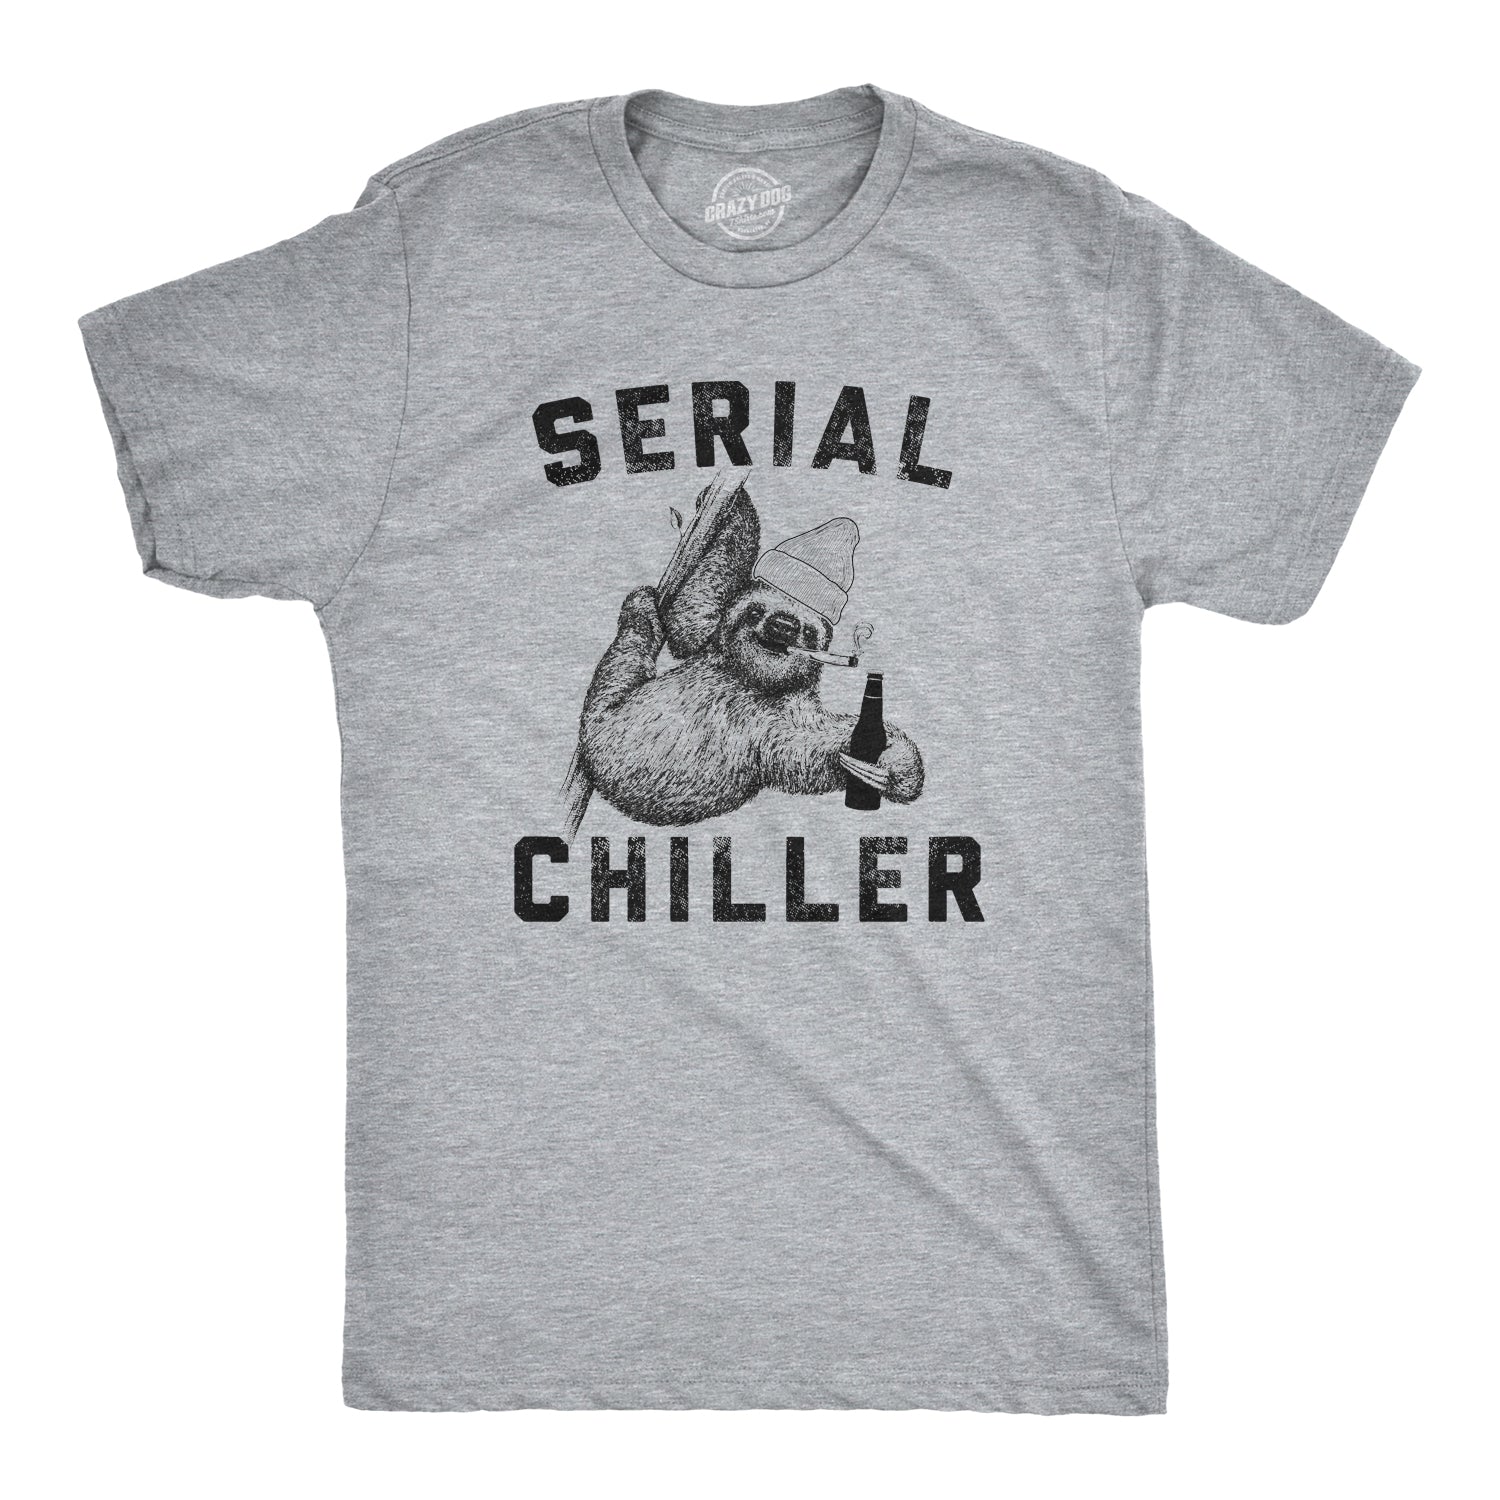 Funny Light Heather Grey Serial Chiller Mens T Shirt Nerdy 420 Beer animal Tee